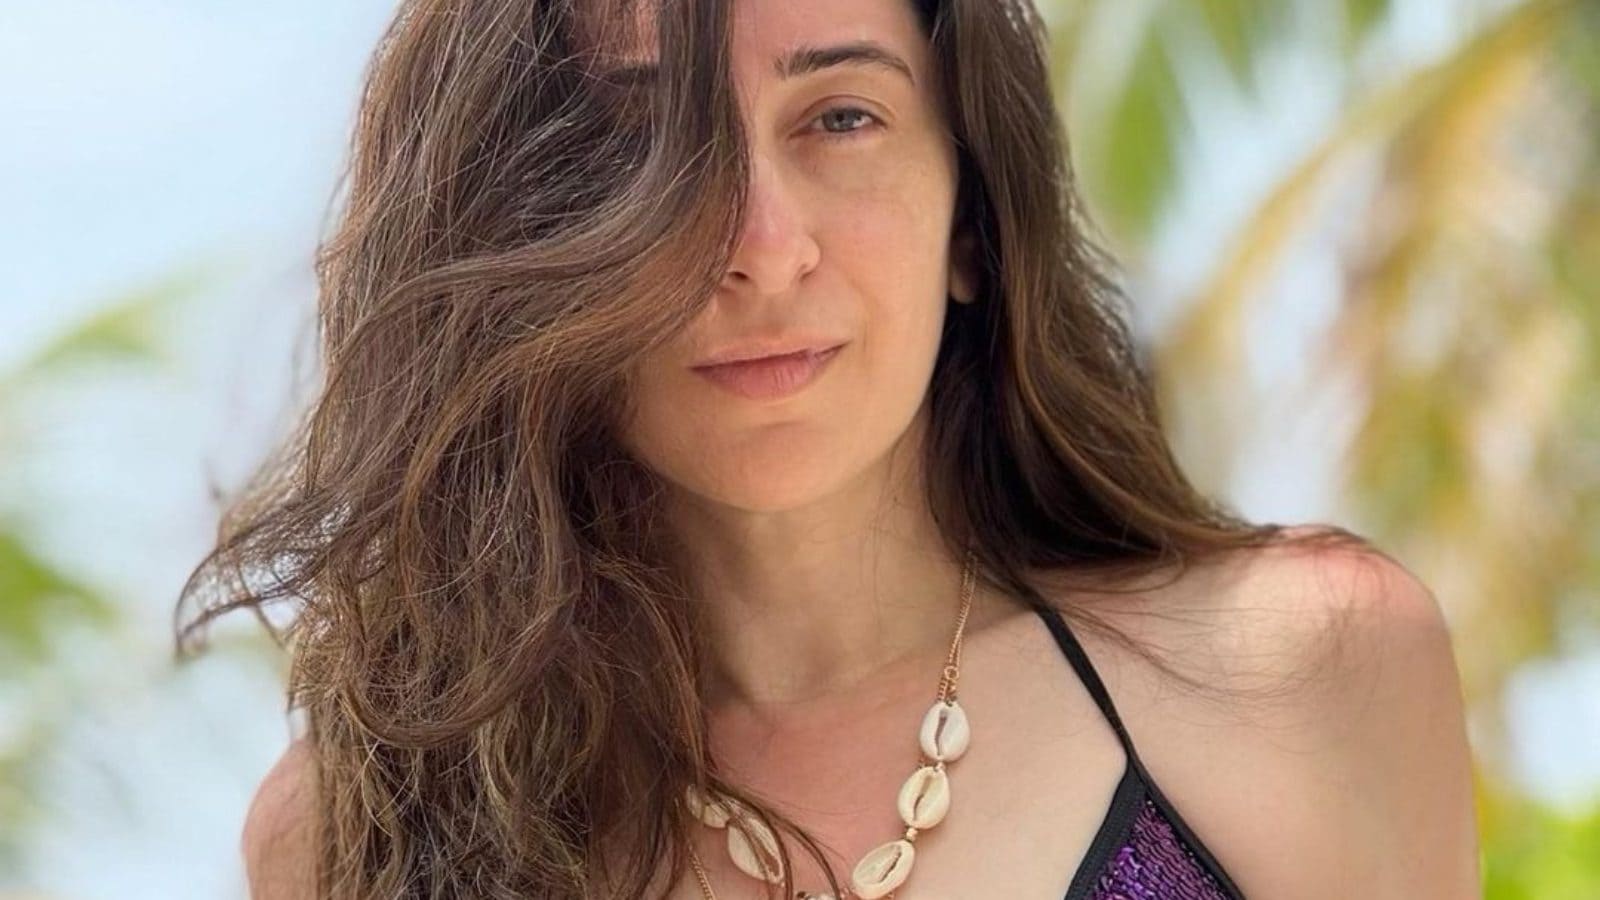 Karishma Kapoor Ki Sexy Movie Xxx - Karisma Kapoor Reminds Age Is Just a Number with Her Latest Sexy Pic, Says  'I Sea You' - News18